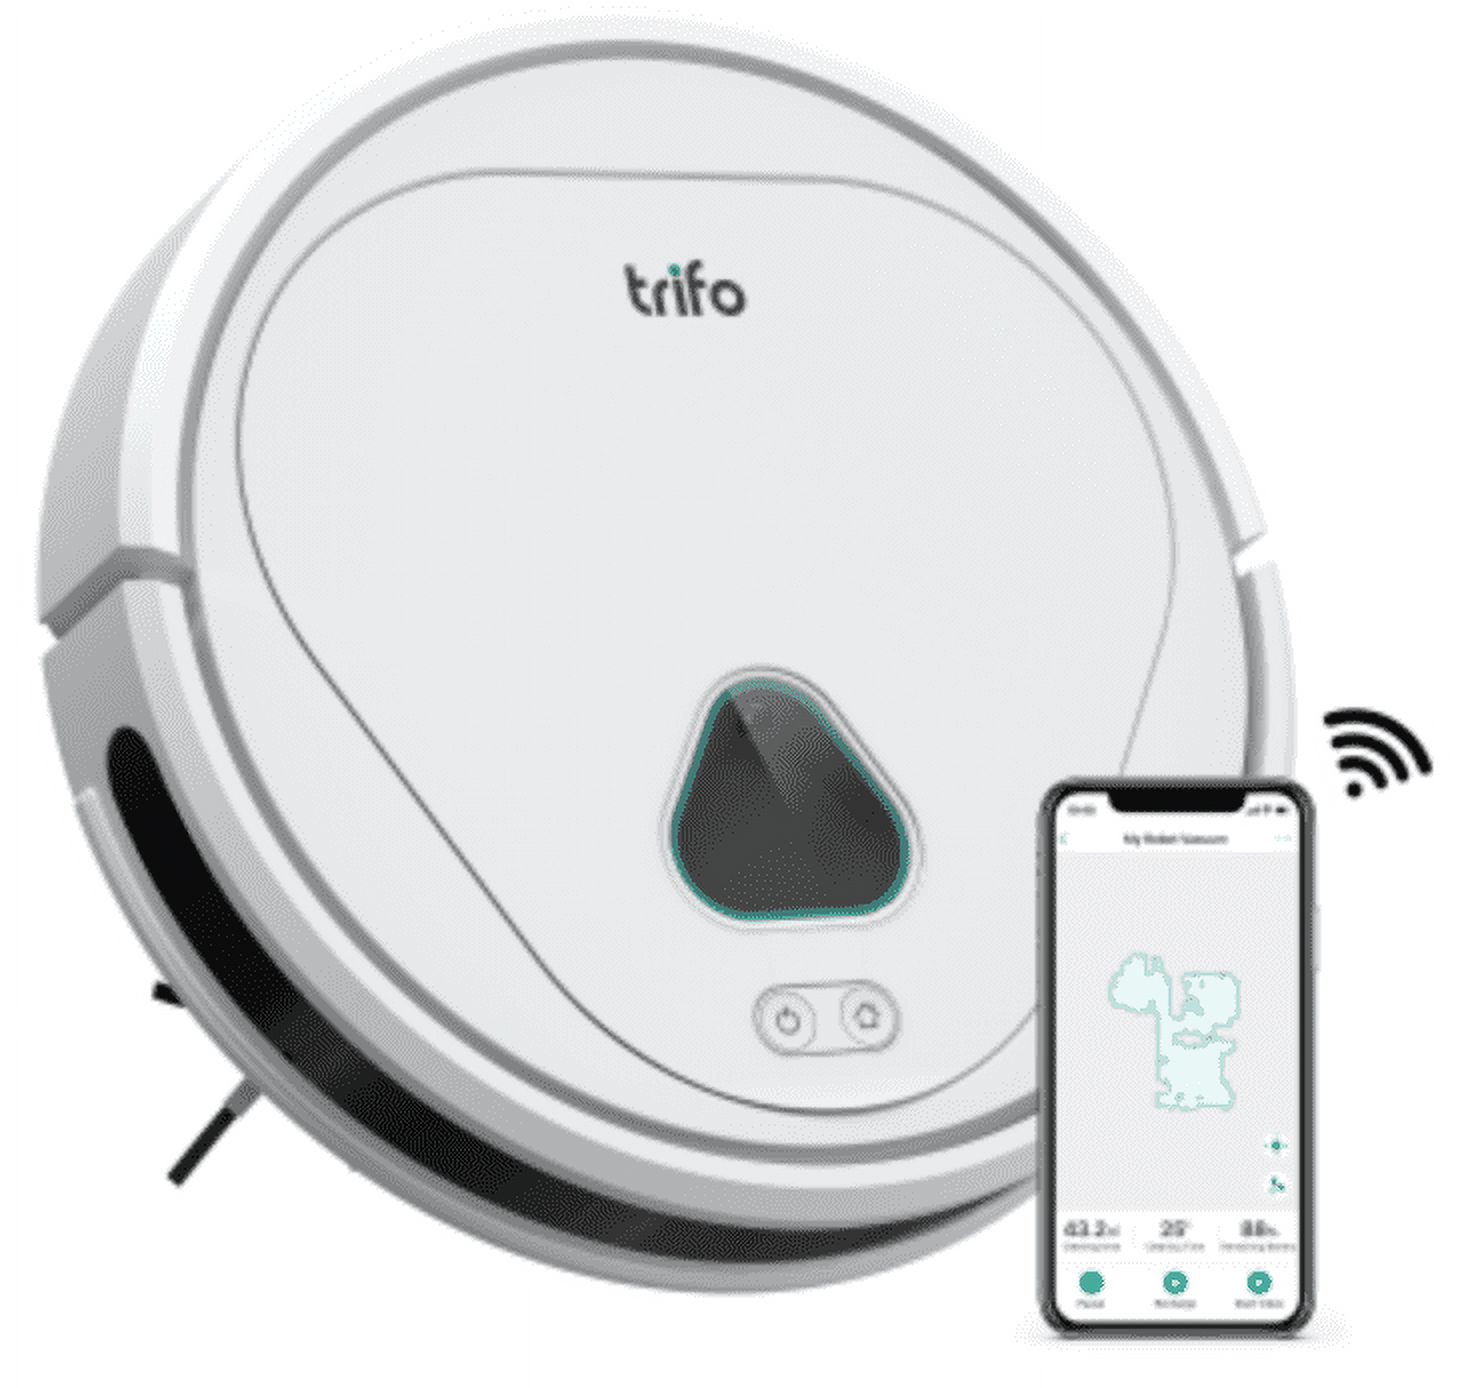 Trifo Maxwell Mapping and Home Monitoring Robot Vacuum - image 1 of 6